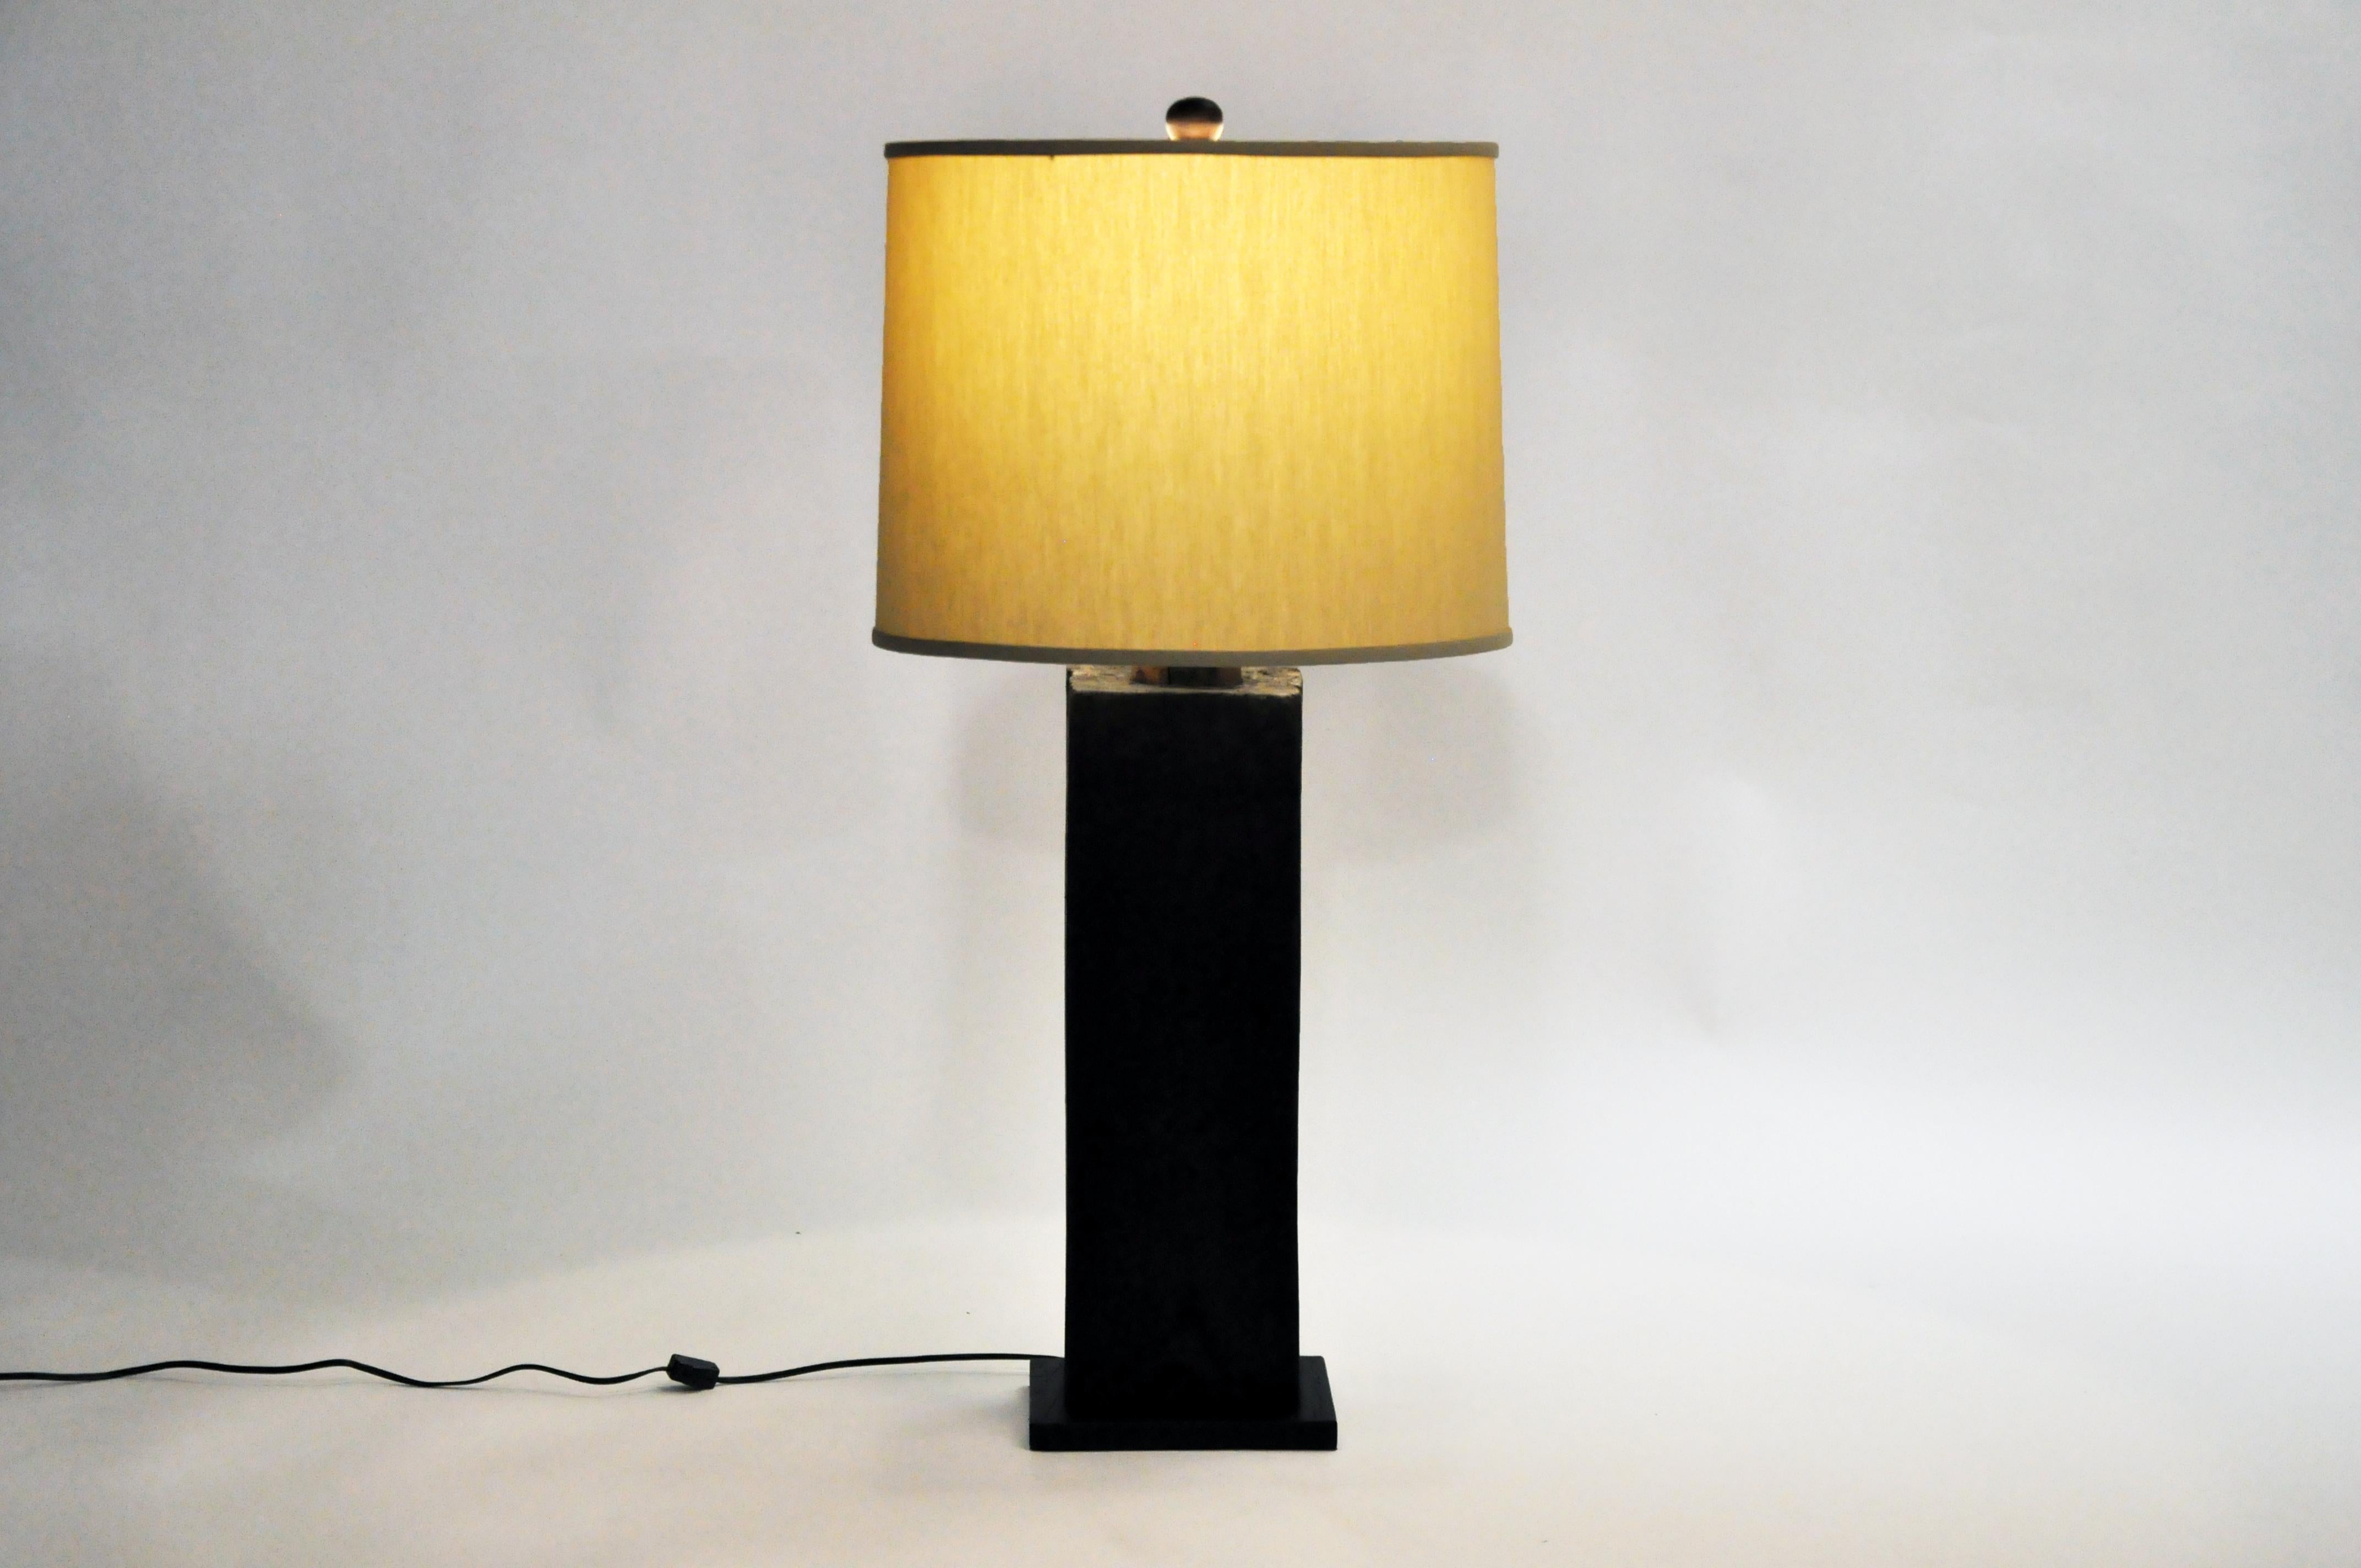 This newly made custom solid wood table lamp was made in the USA from reclaimed wood from Thailand. The lamp has been wired for use in the US.